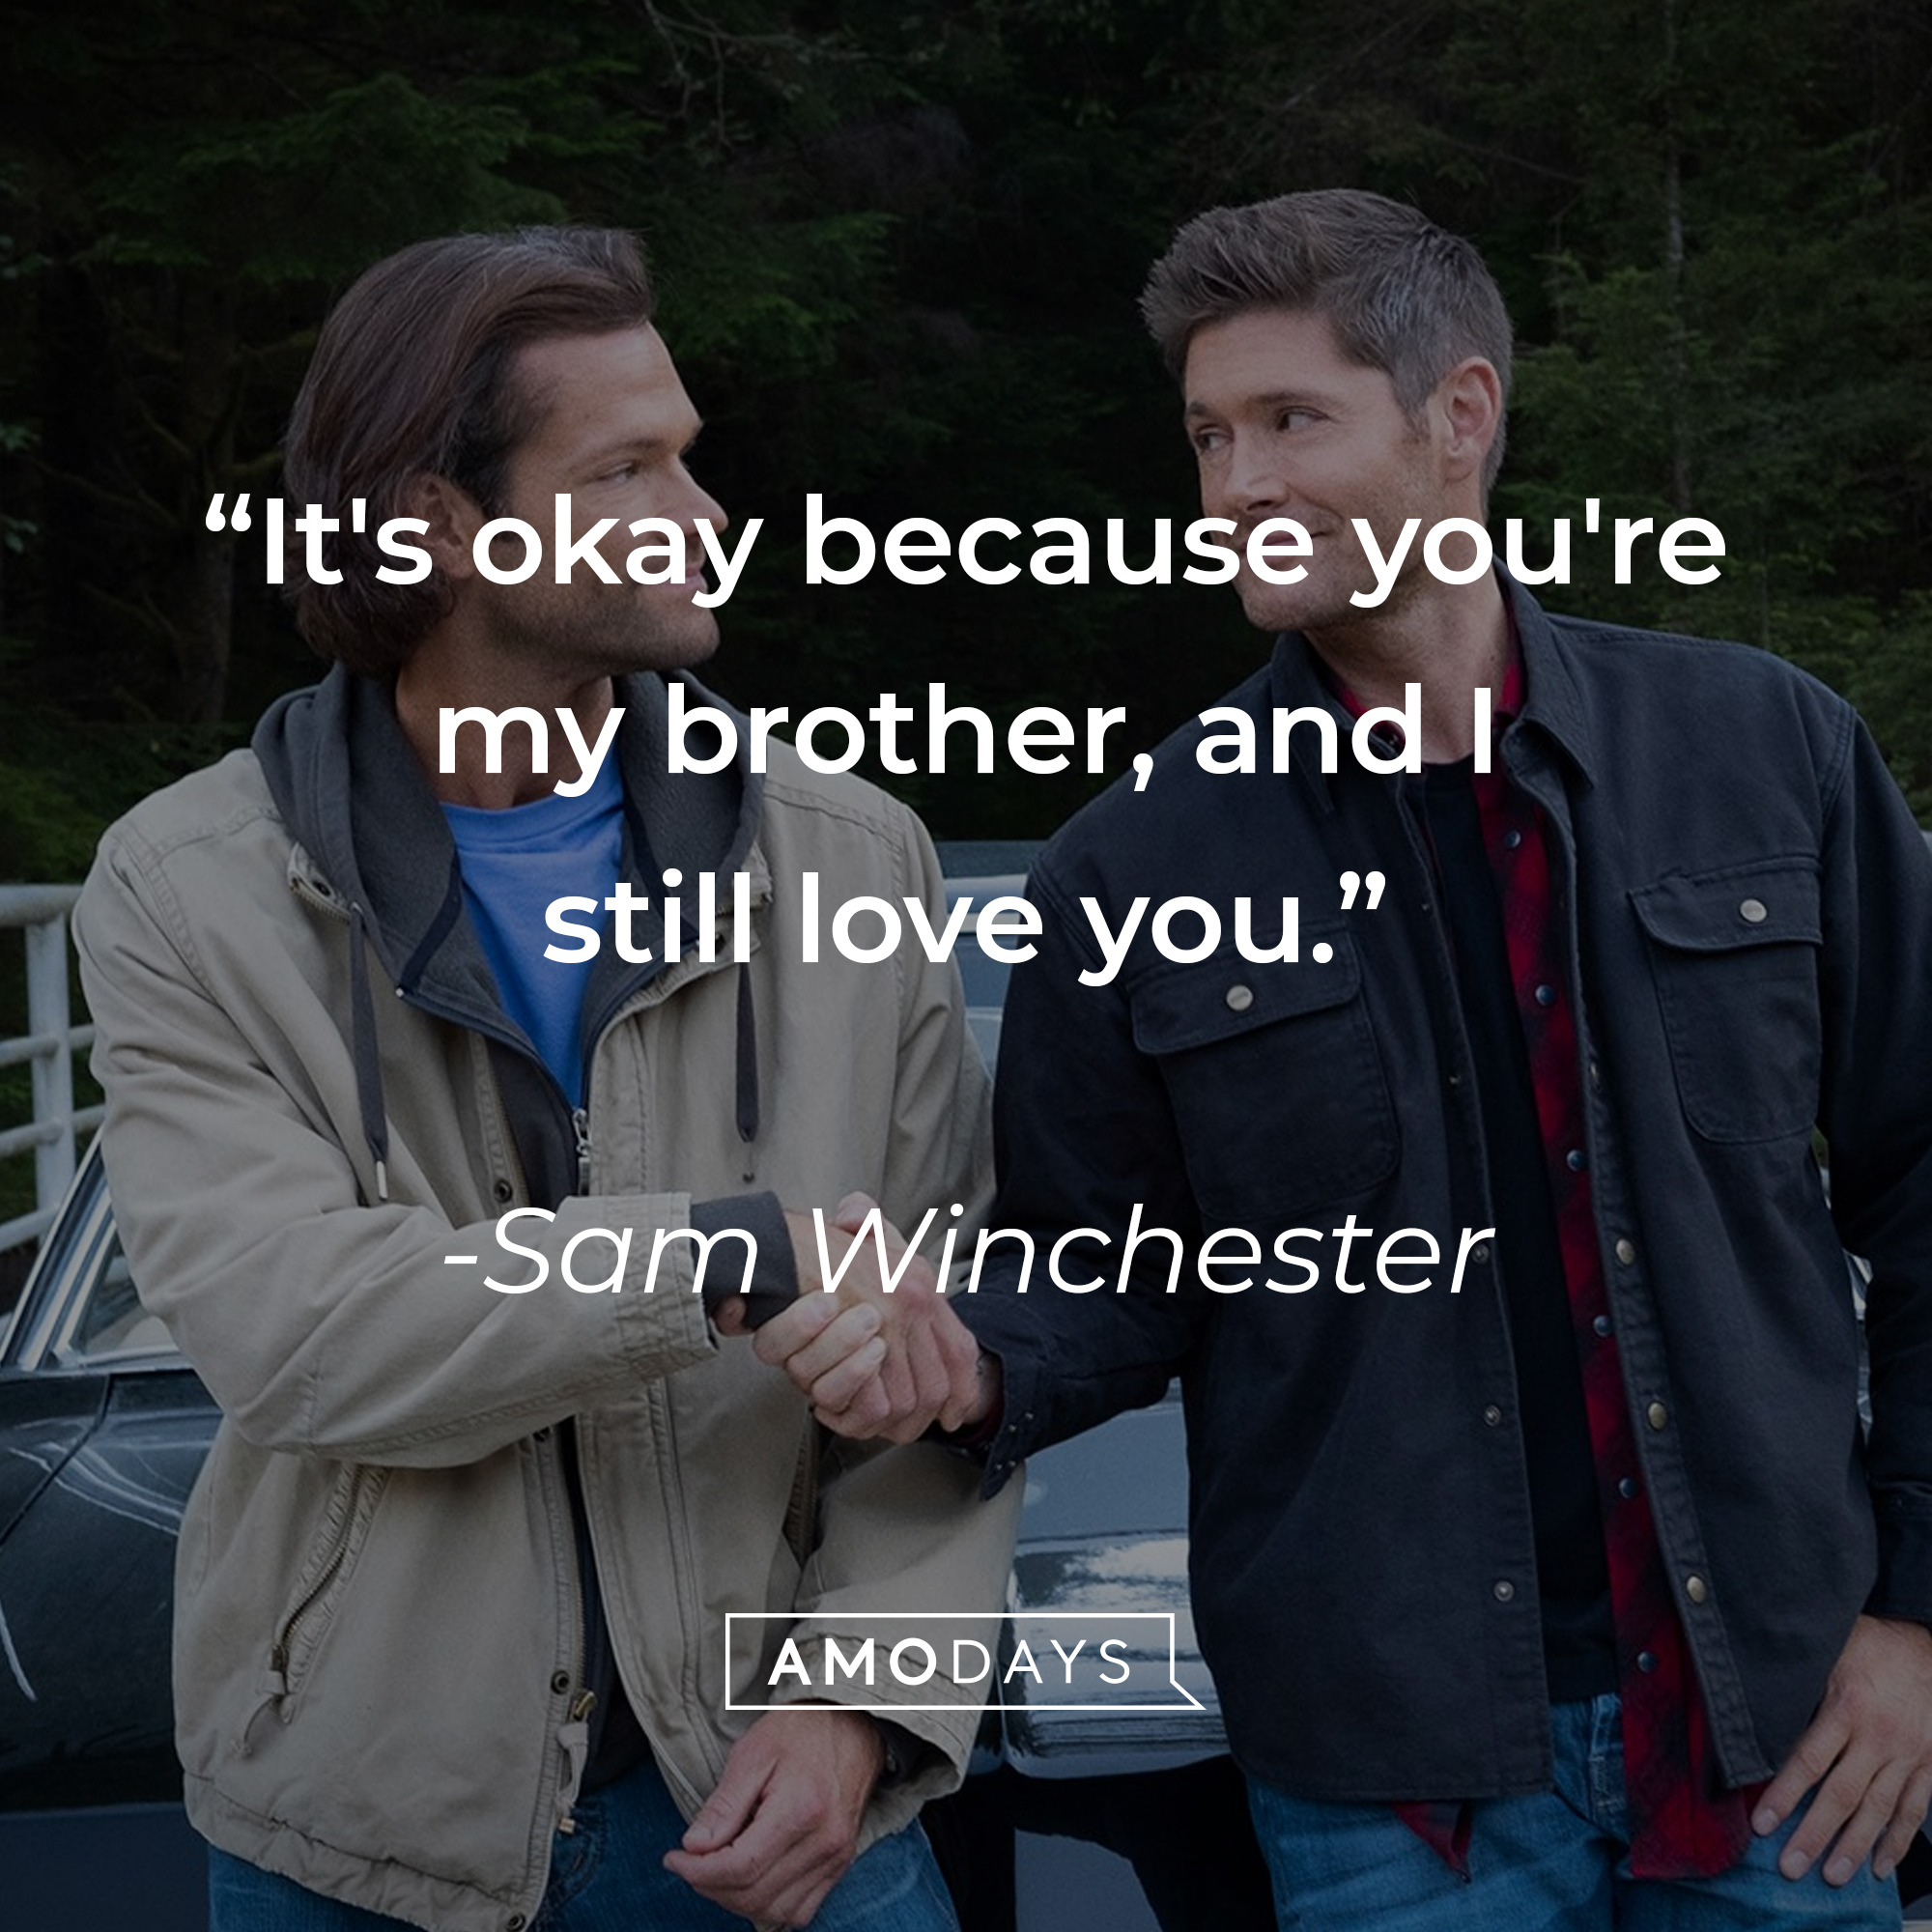 Sam Winchester's quote: "It's okay because you're my brother, and I still love you." | Source: Facebook.com/Supernatural